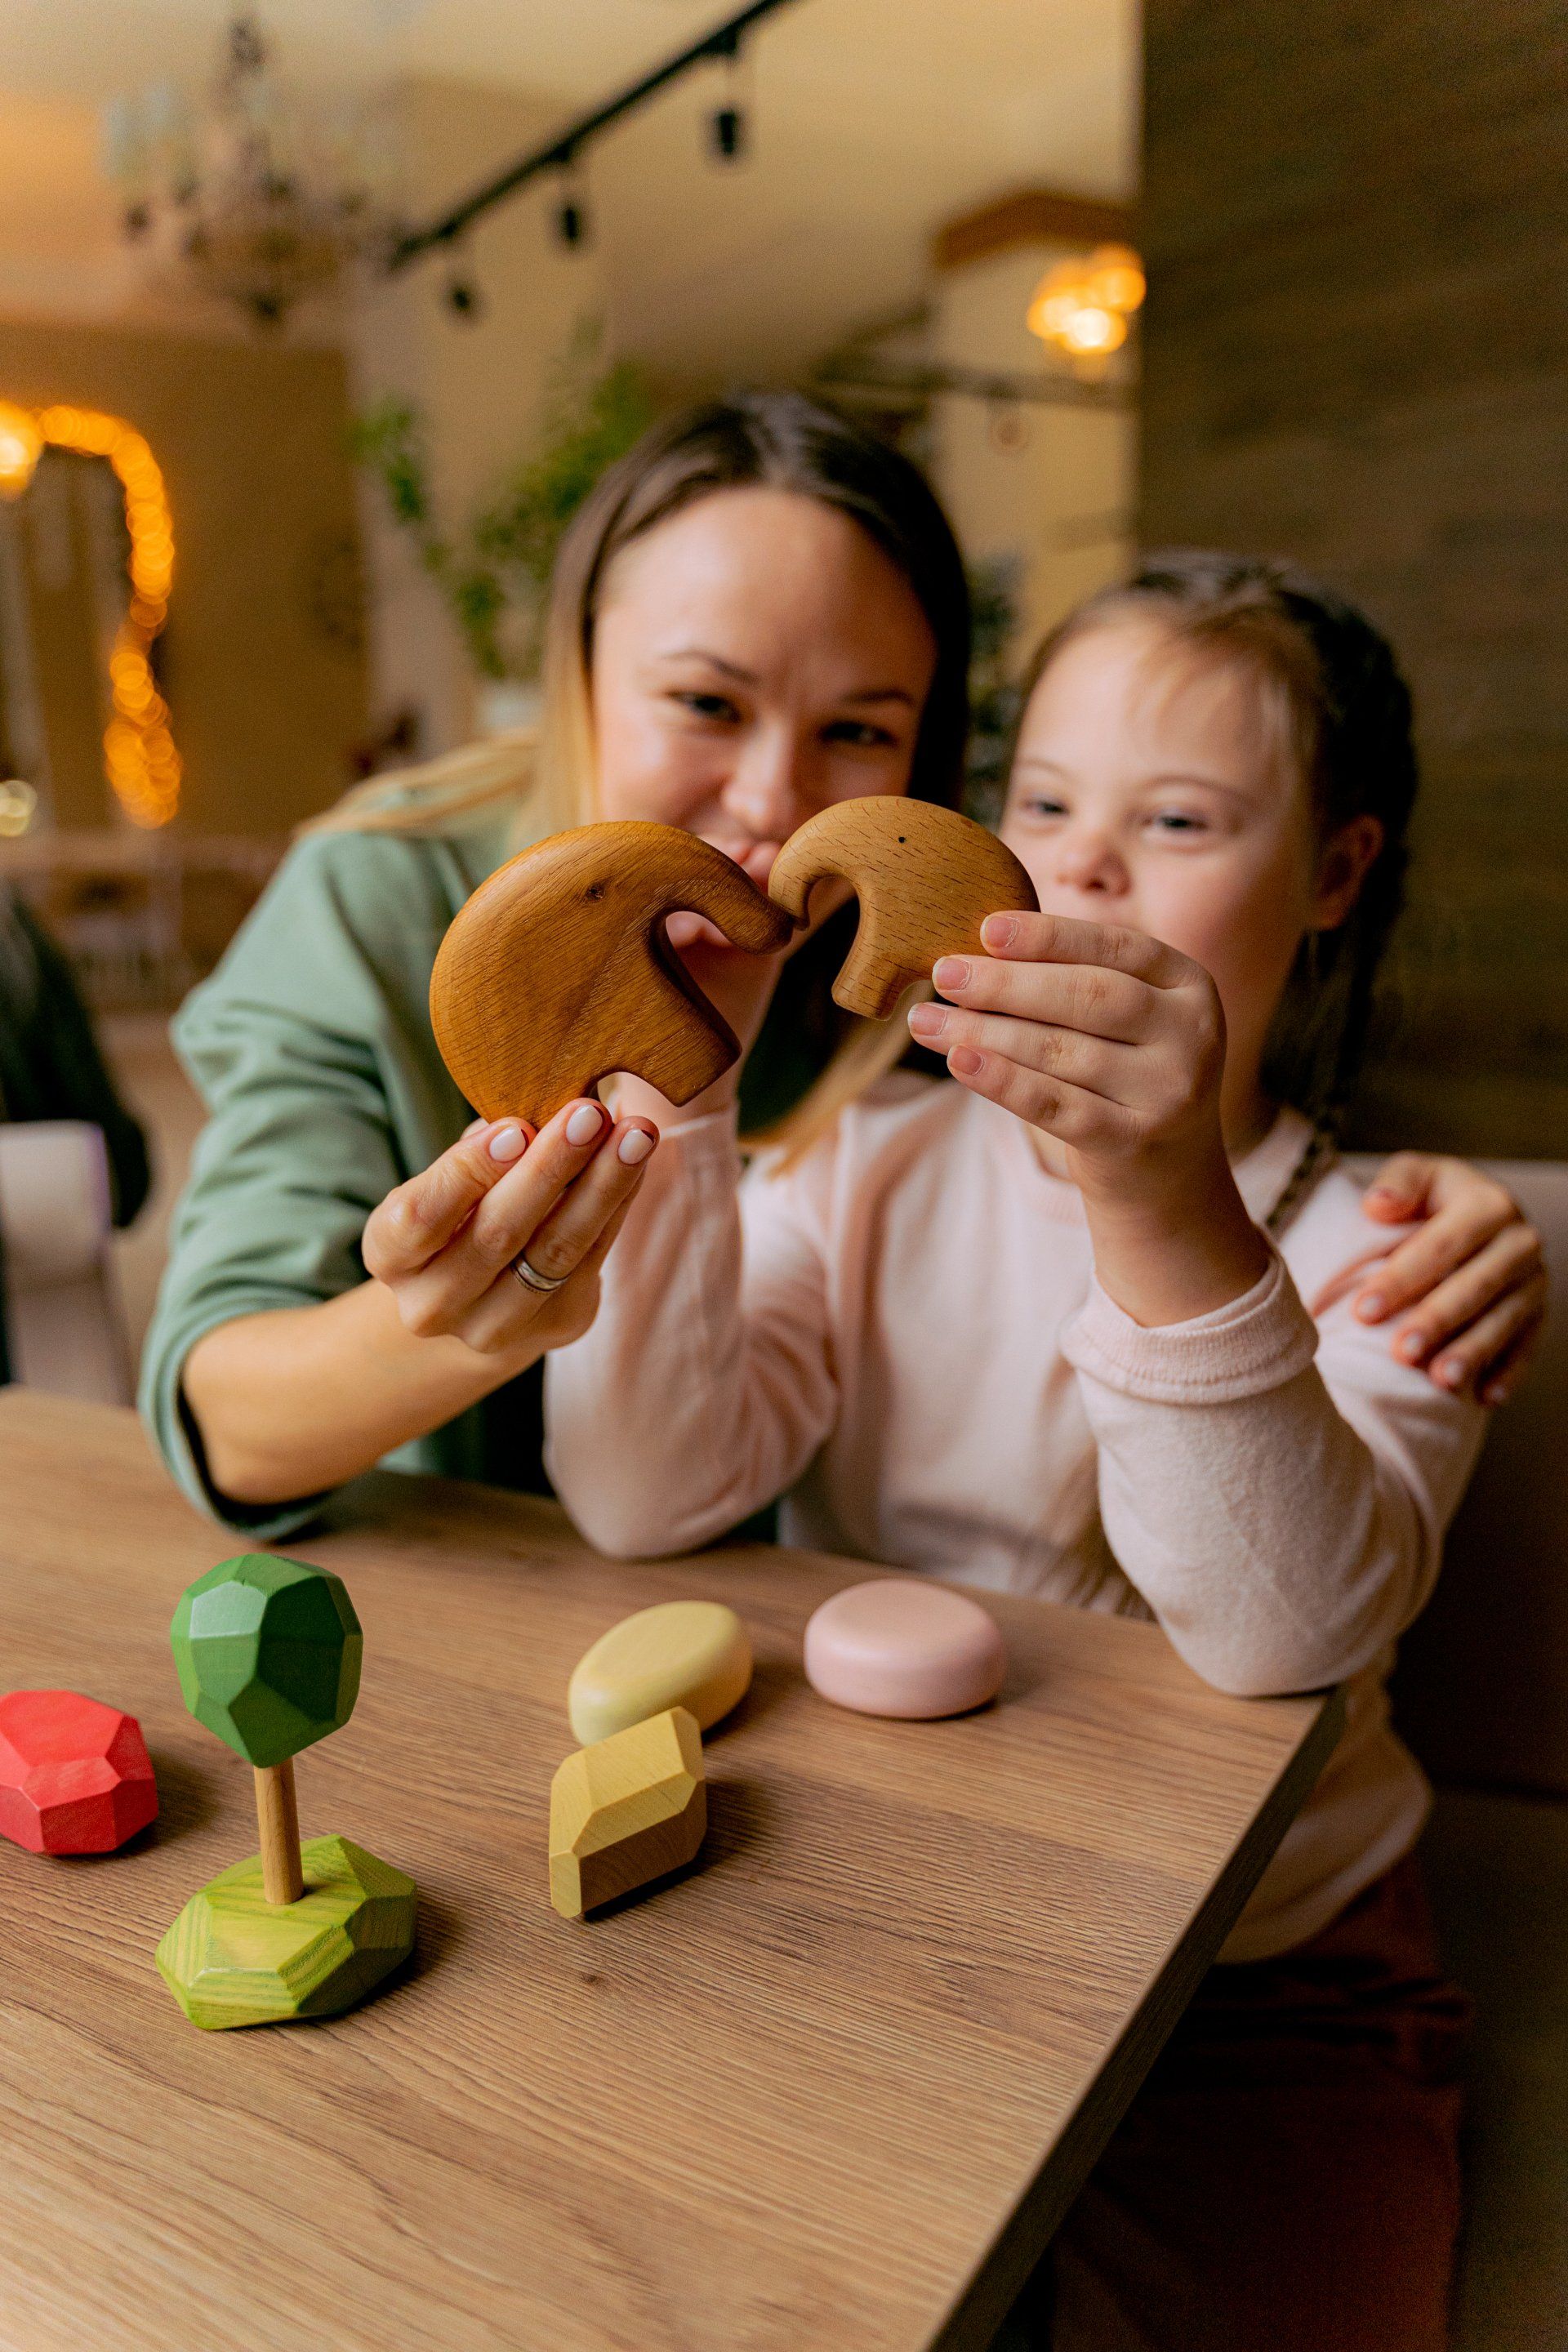 A woman and a little girl are playing with wooden toys at a table.